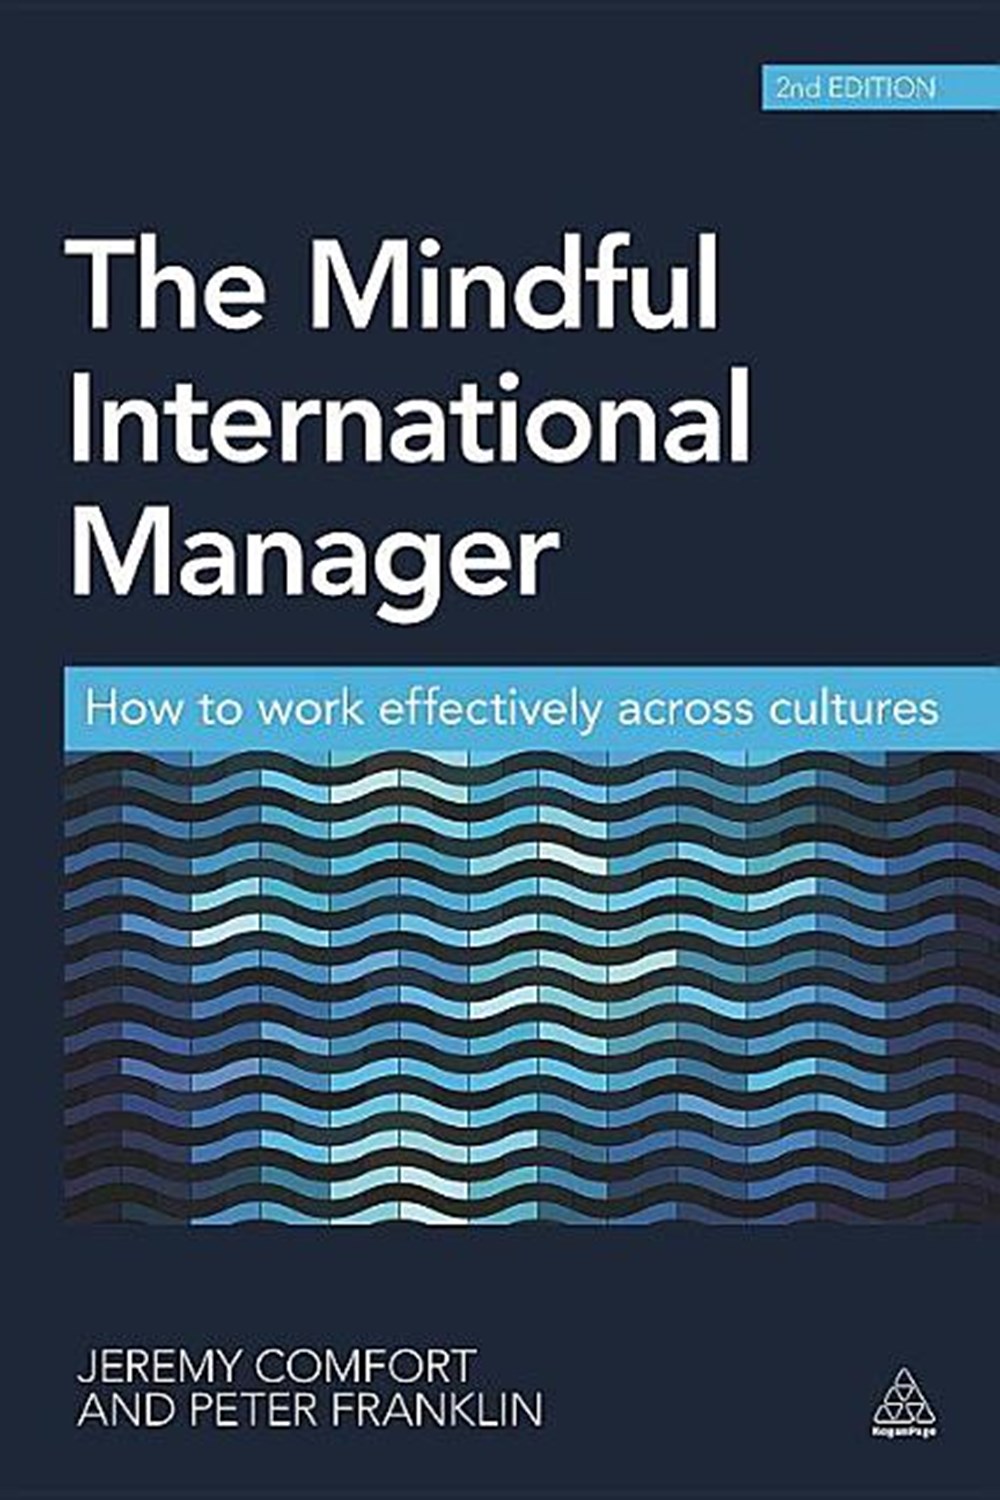 Mindful International Manager: How to Work Effectively Across Cultures